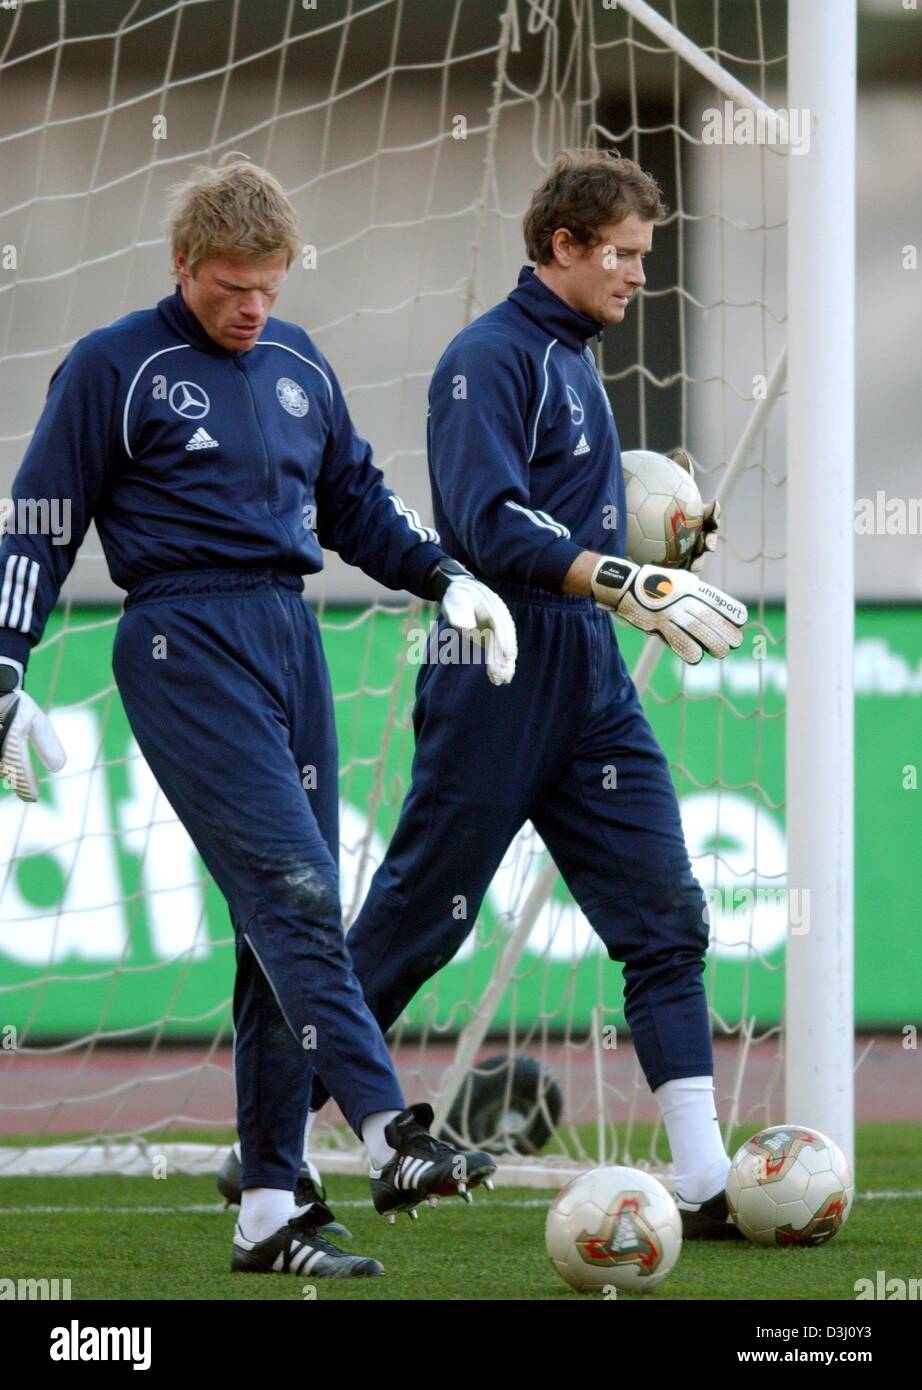 (dpa files) The goalie of the German national soccer team Oliver Kahn (left) and his colleague Jens Lehmann stand both in the goal during a training session of the German team on 10 February 2004 at the Son Moix-Stadium in Palma de Mallorca, Spain. Franz Beckenbauer, president of the organising commitee of the FIFA World Cup 2006 in Germany, asked Rudi Voeller, the coach of the Ger Stock Photo